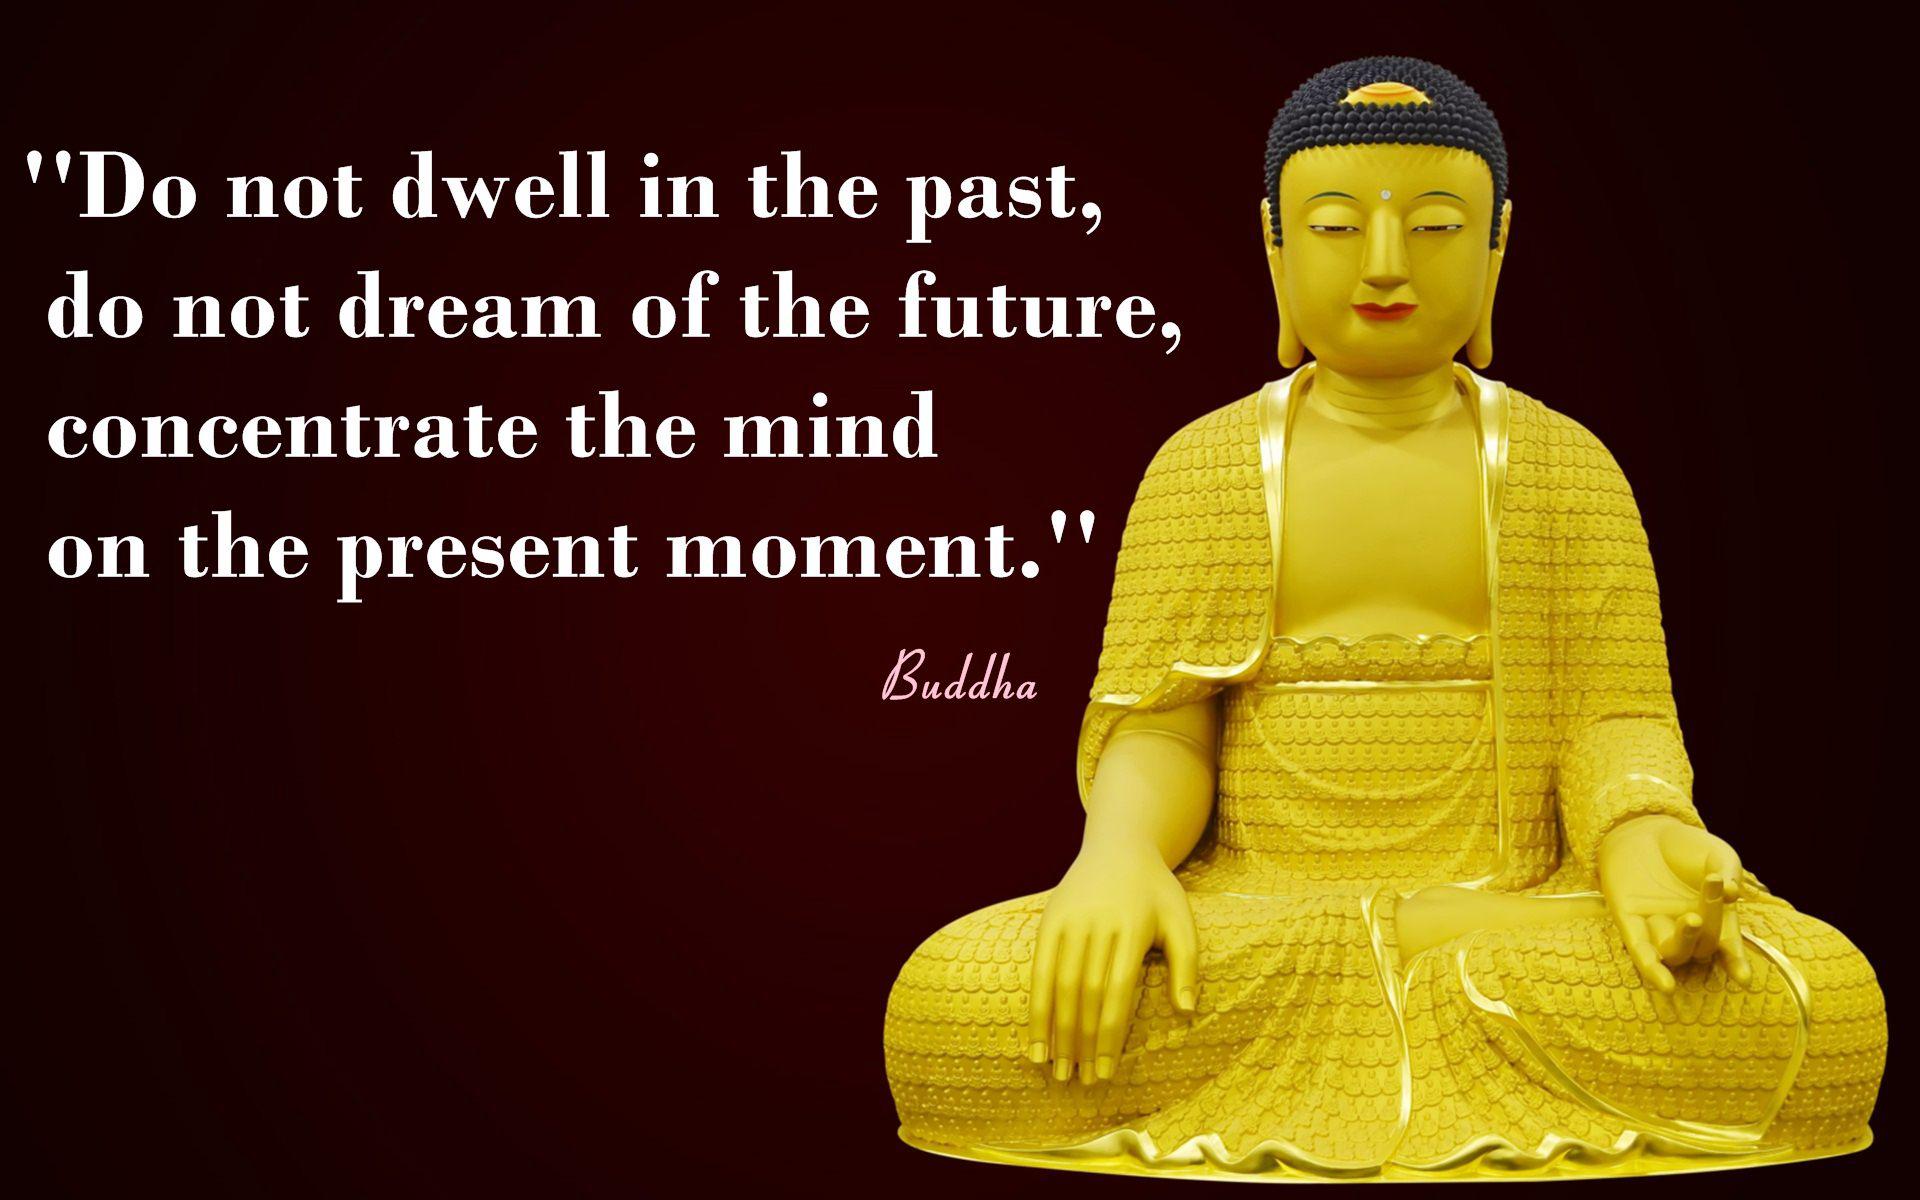 Buddha Quotes About Change QuotesGram